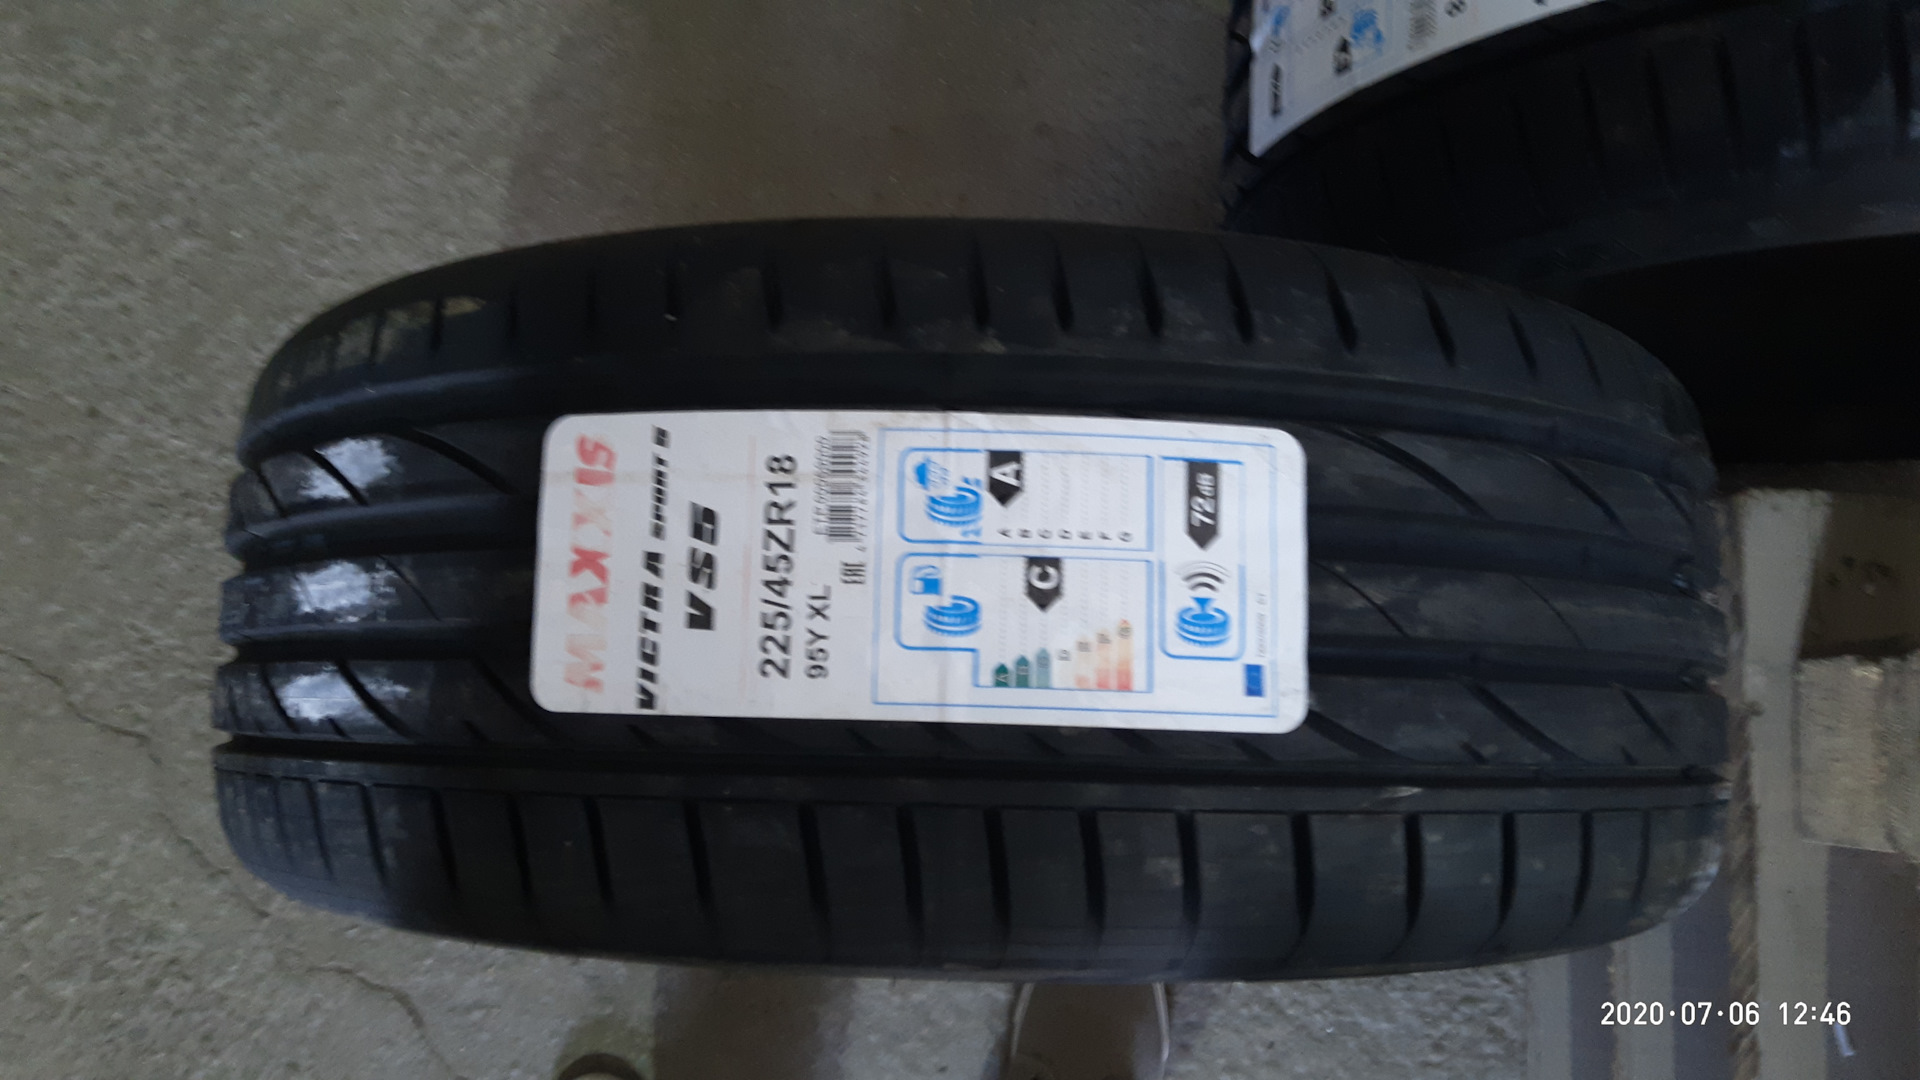 Maxxis victra sport 5 r20. Шины Maxxis Victra Sport 5. Maxxis Victra Sport 5 vs5. Maxxis Victra Sport 5 евроэтикетка. Maxxis Victra Sport vs5.